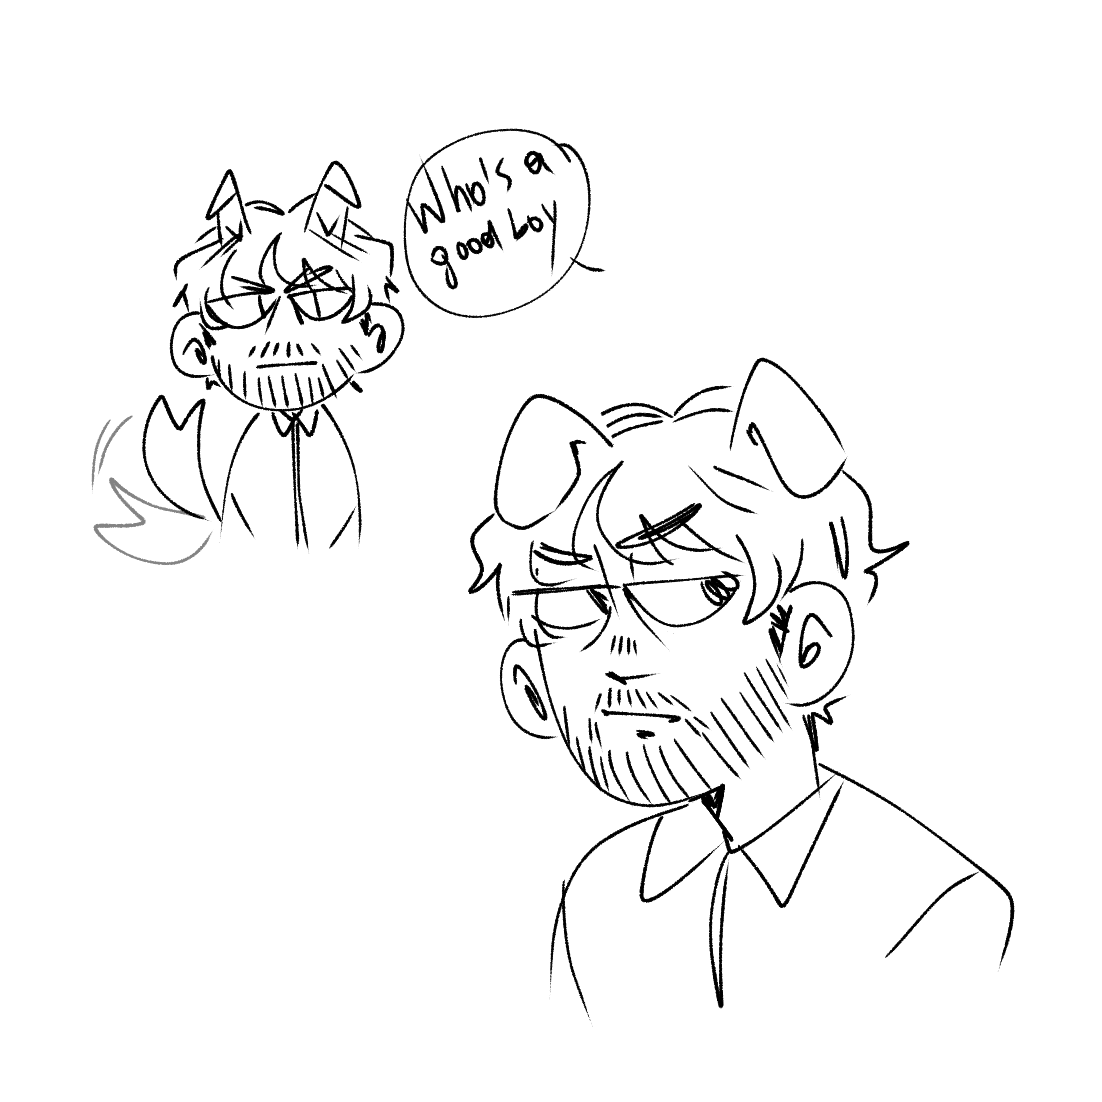 instagram requests and a hshr for kdad yes its all will graham 